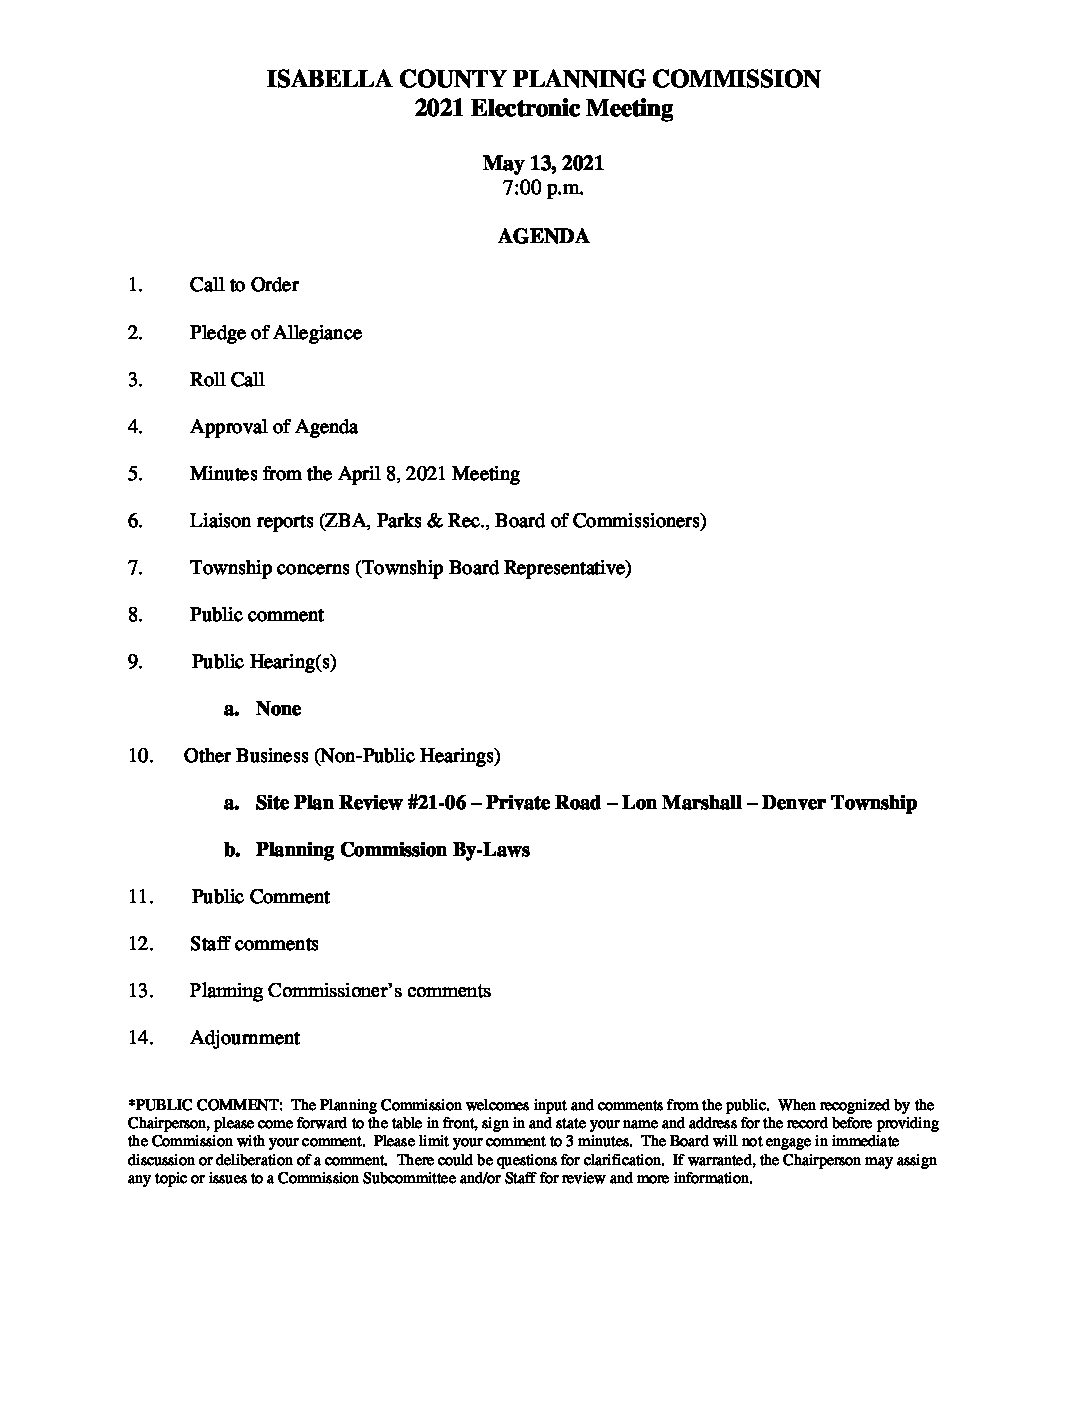 preview image of first page May 13, 2021 Agenda